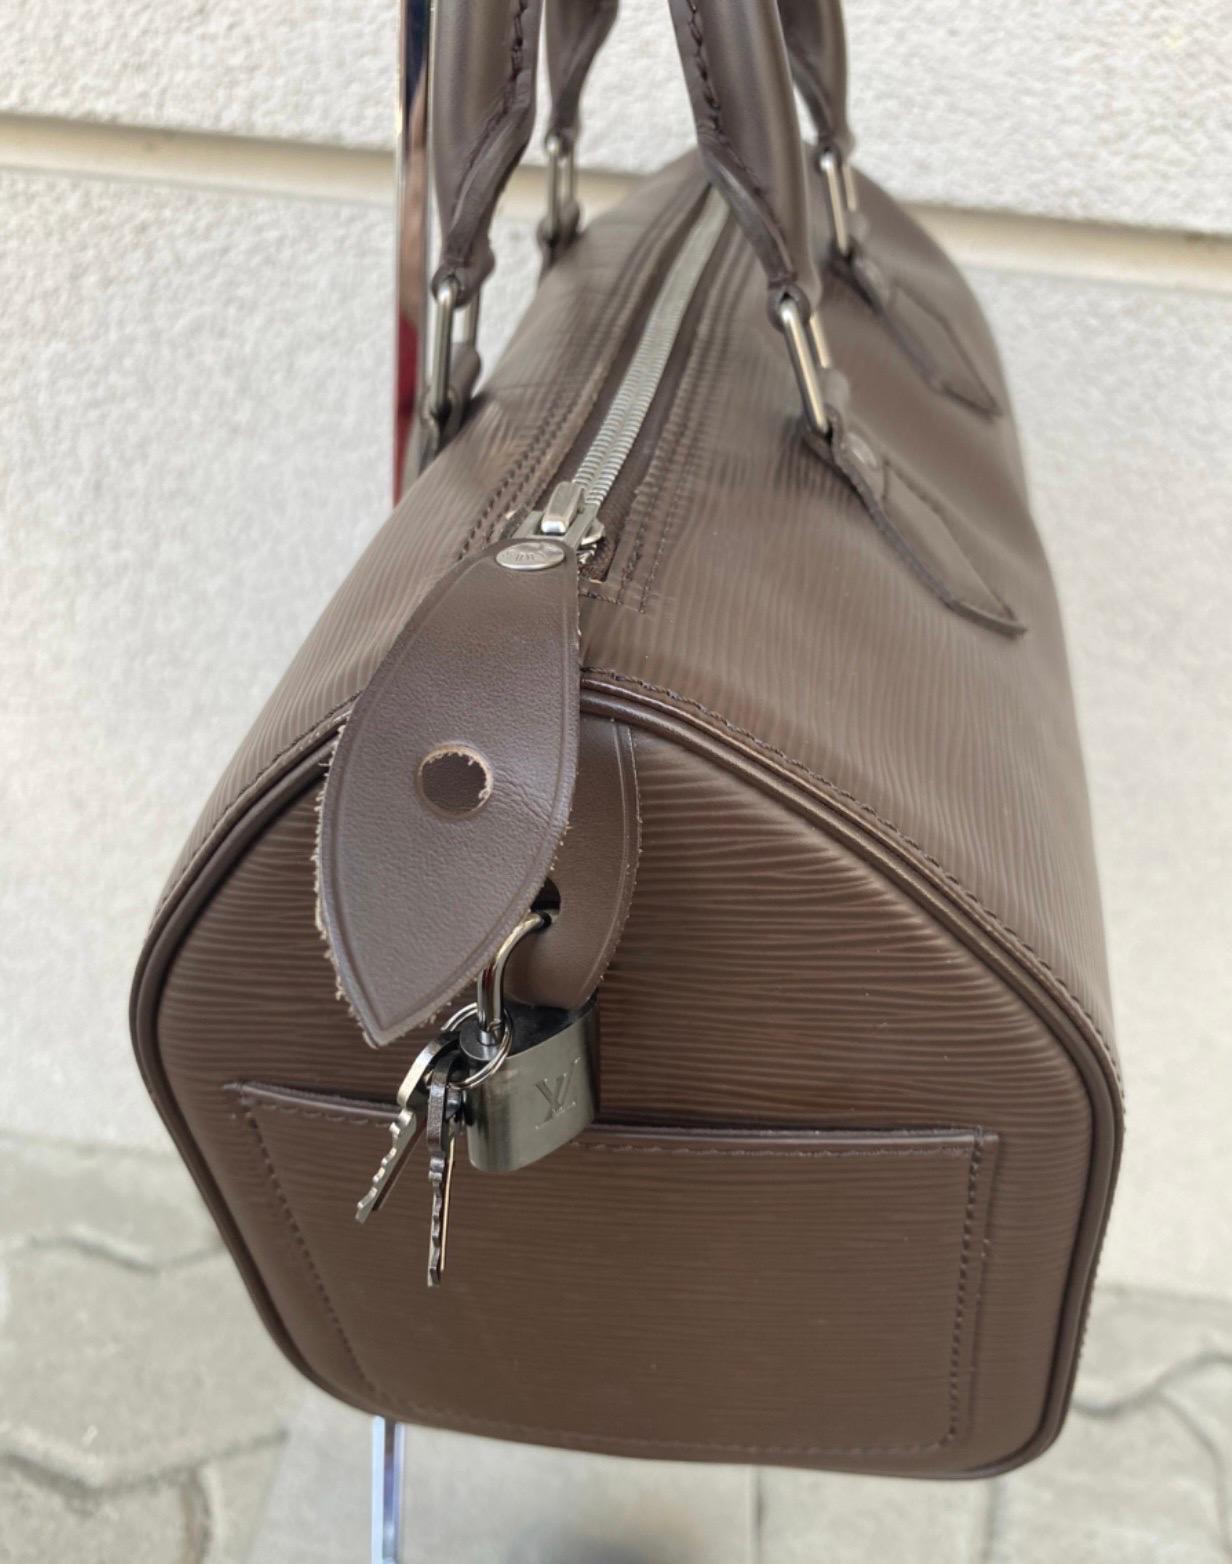 Speedy Louis Vuitton in brown epi leather, dimensions: length 30cm height 21cm width 17cm, in very good condition, equipped with key and padlock.